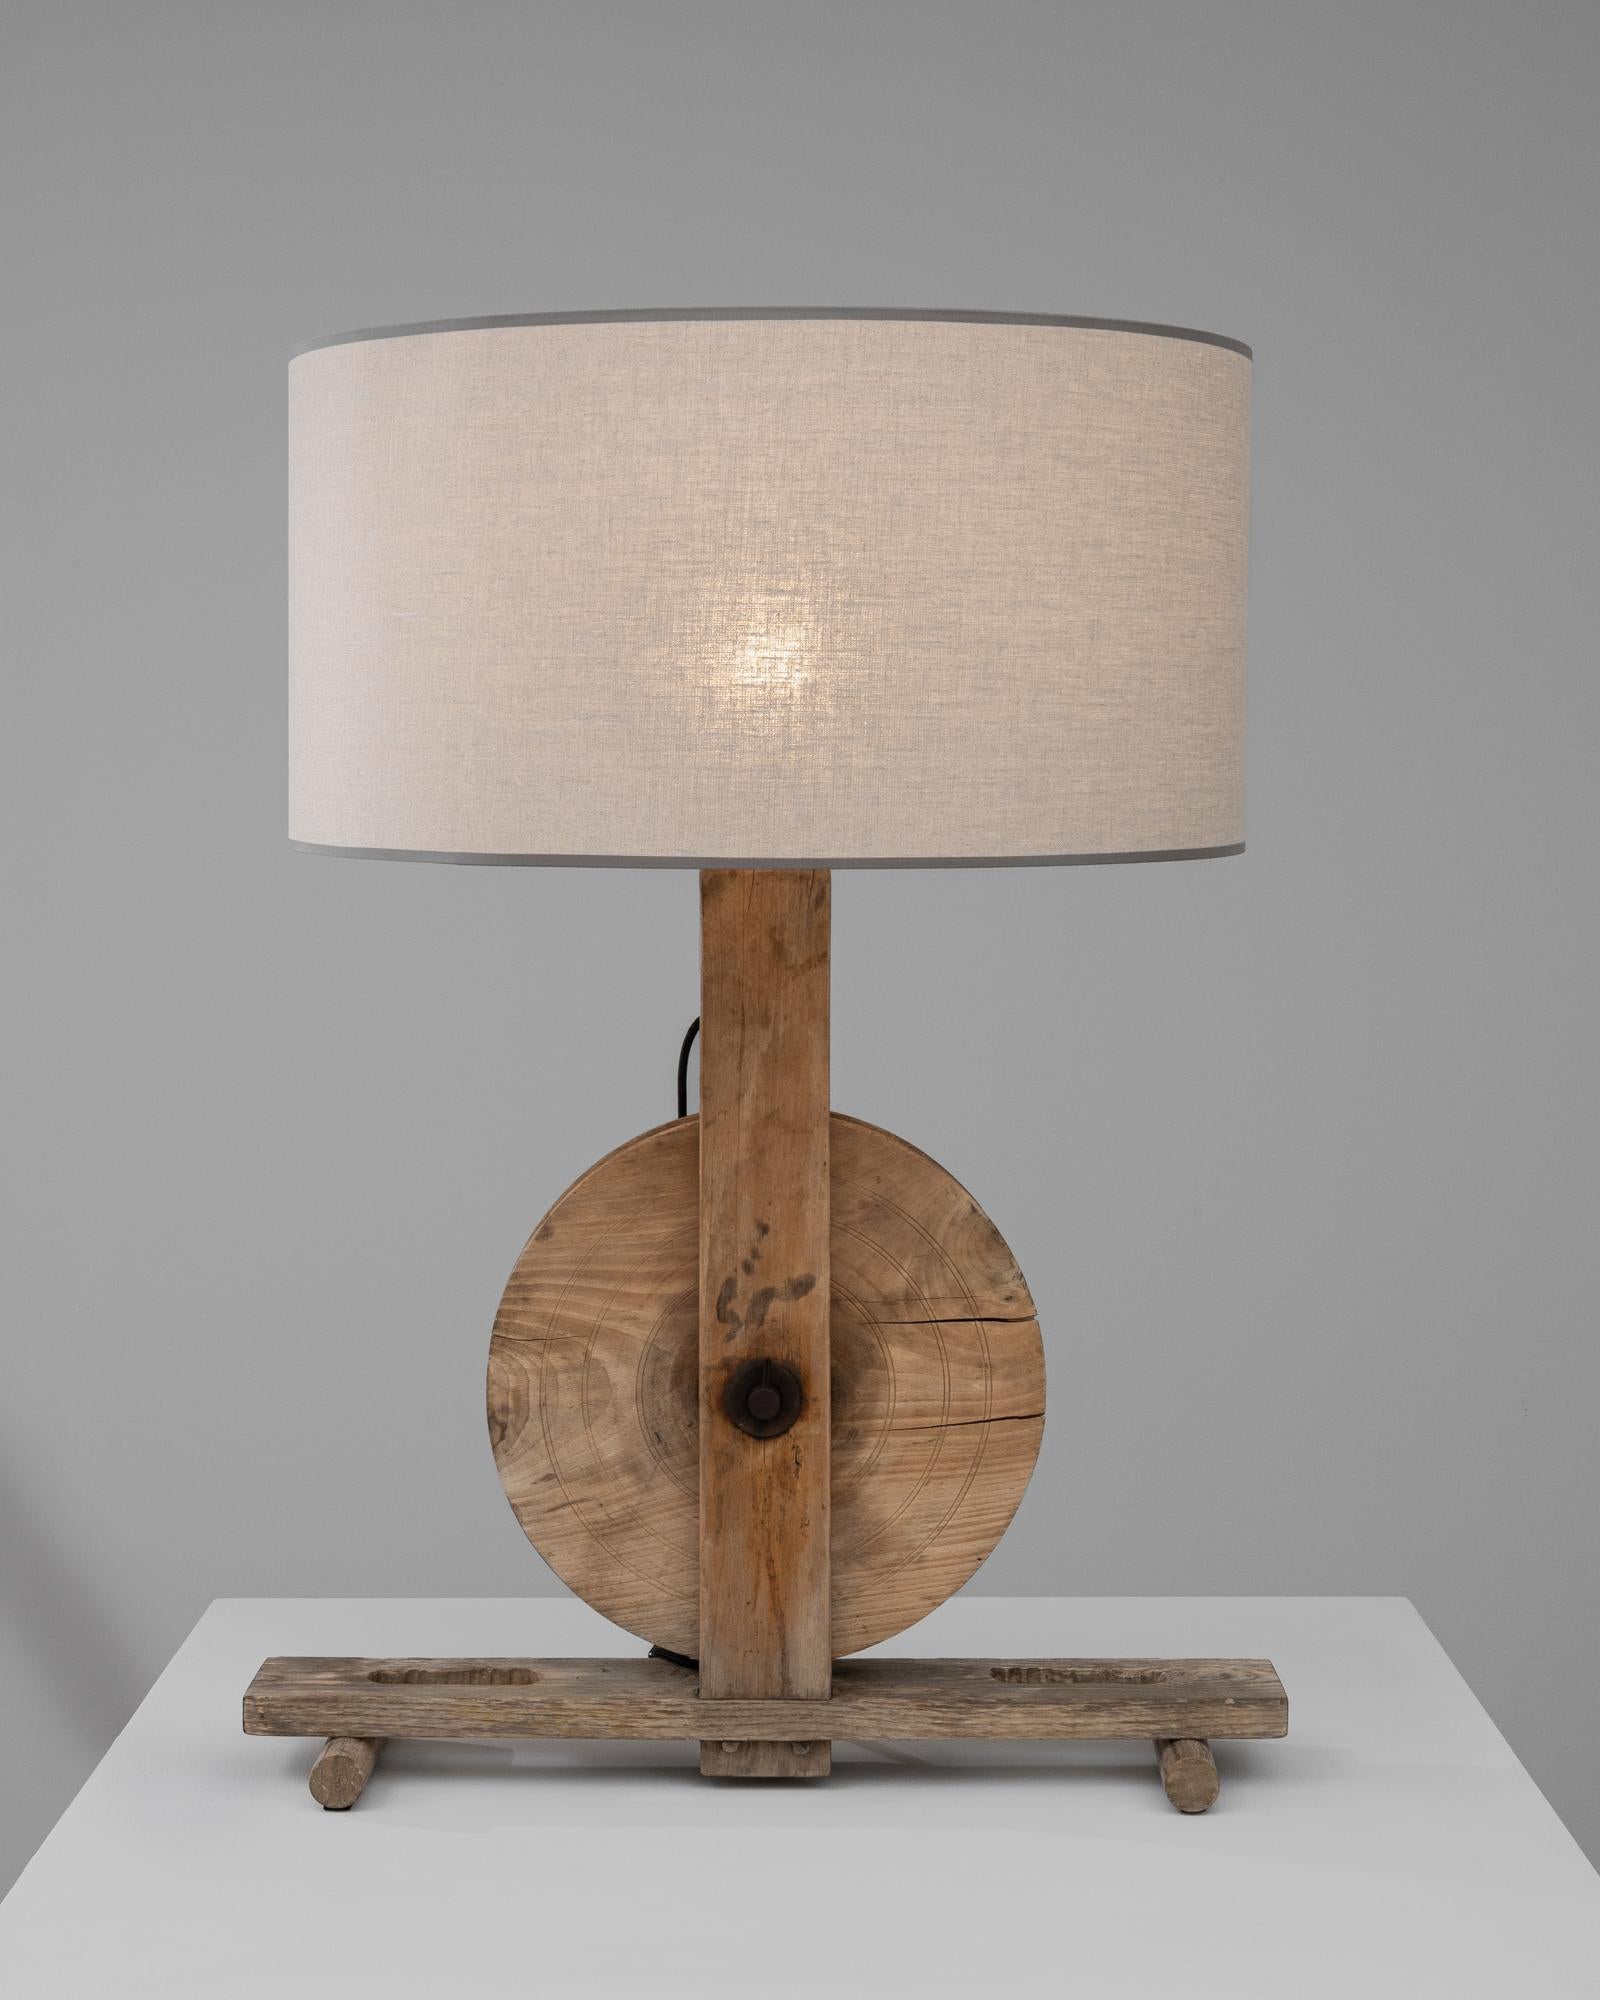 Infuse your living space with the rustic charm of this unique Early 20th Century British Table Lamp, where functionality meets artisanal craftsmanship. The base, carved from aged wood with all its natural knots and grains on display, is a homage to